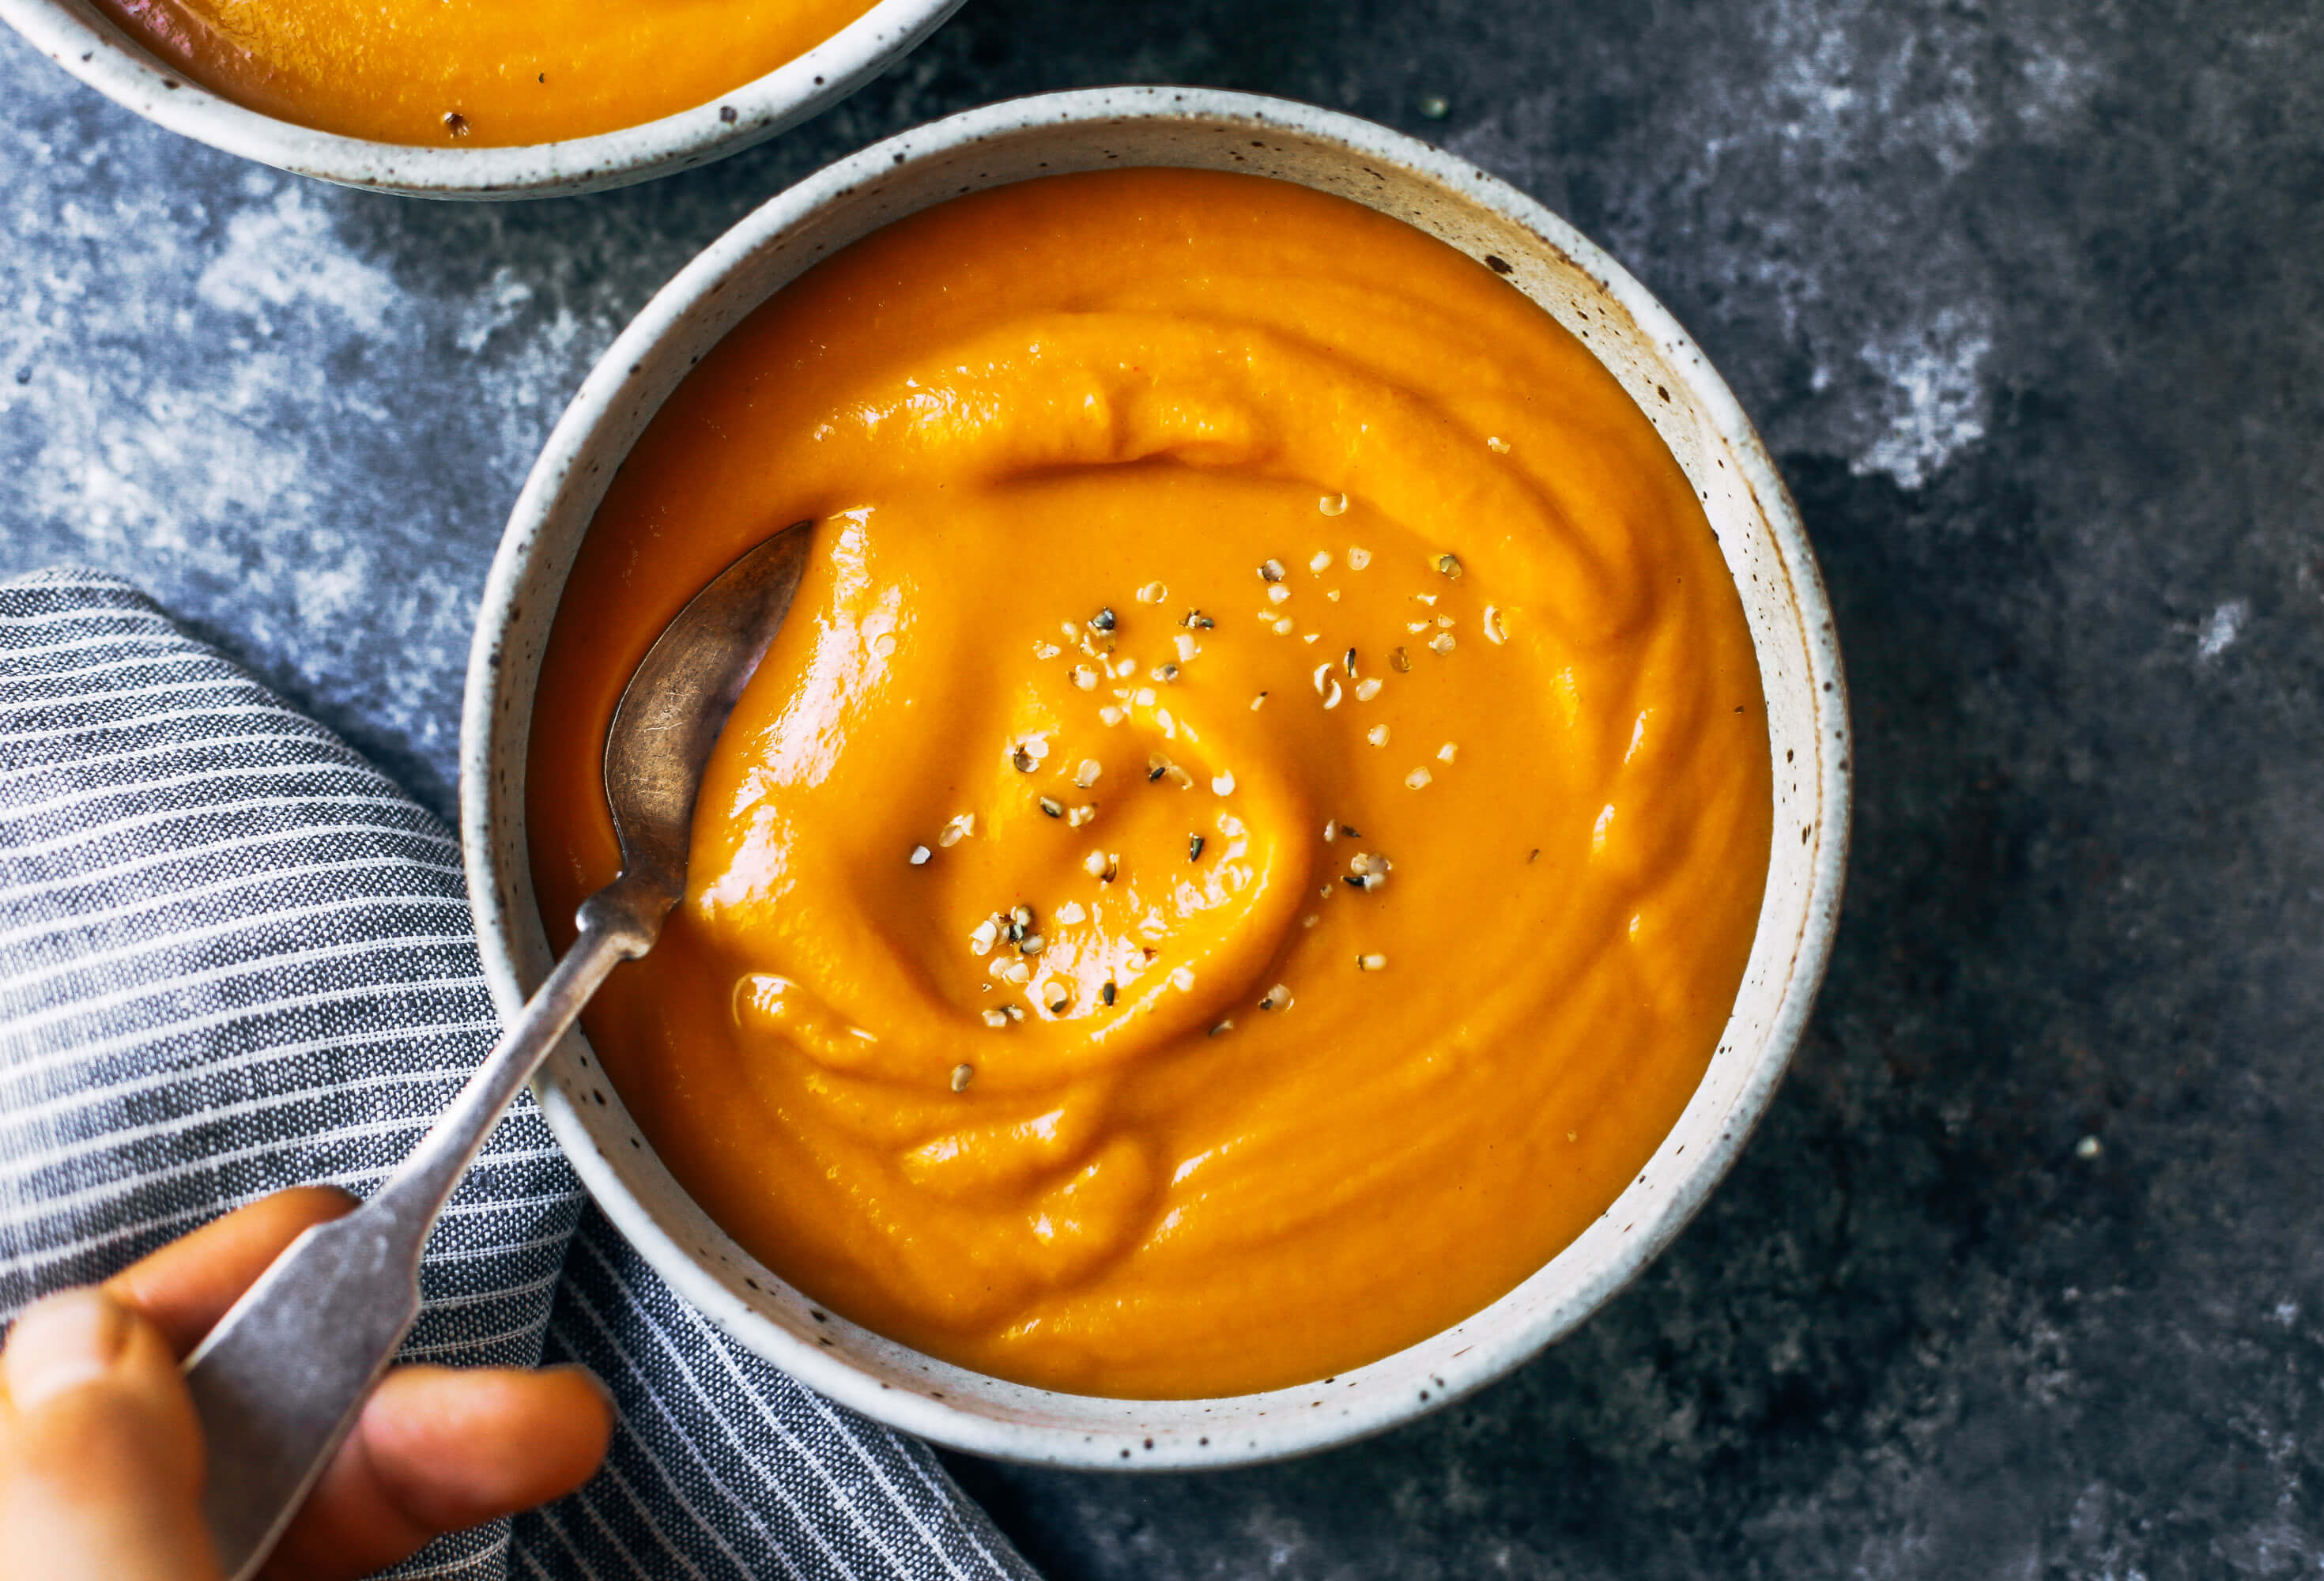 Low calorie easy butternut curry soup made with healthy ingredients! Family friendly whole30 meal prep. My favorite paleo dinner for fall and cozy winter evenings. Love this paleo healthy soup recipe to make ahead and store in the fridge to use though the week! #whole30 #paleodiet #healthydinner